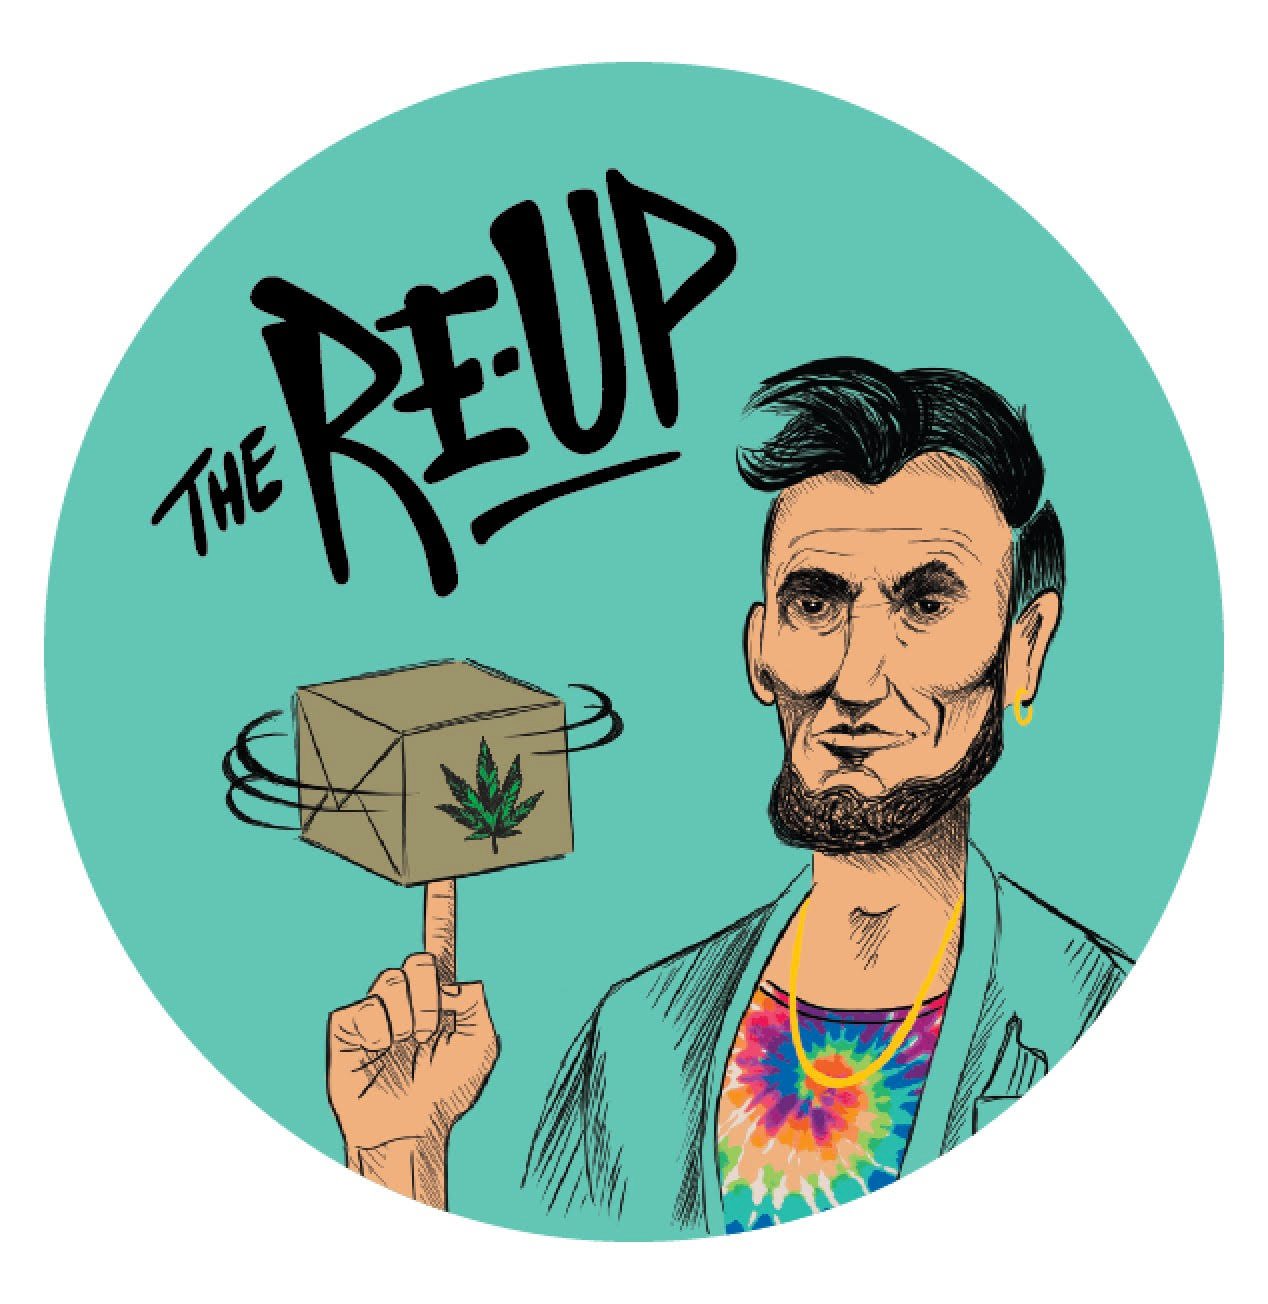 The Re-Up is a FREE - FAST - PREMIUM CANNABIS + CBD DELIVERY SERVICE IN SACRAMENTO & SURROUNDING CITIES 

State Licensed for both Medical and Recreational!